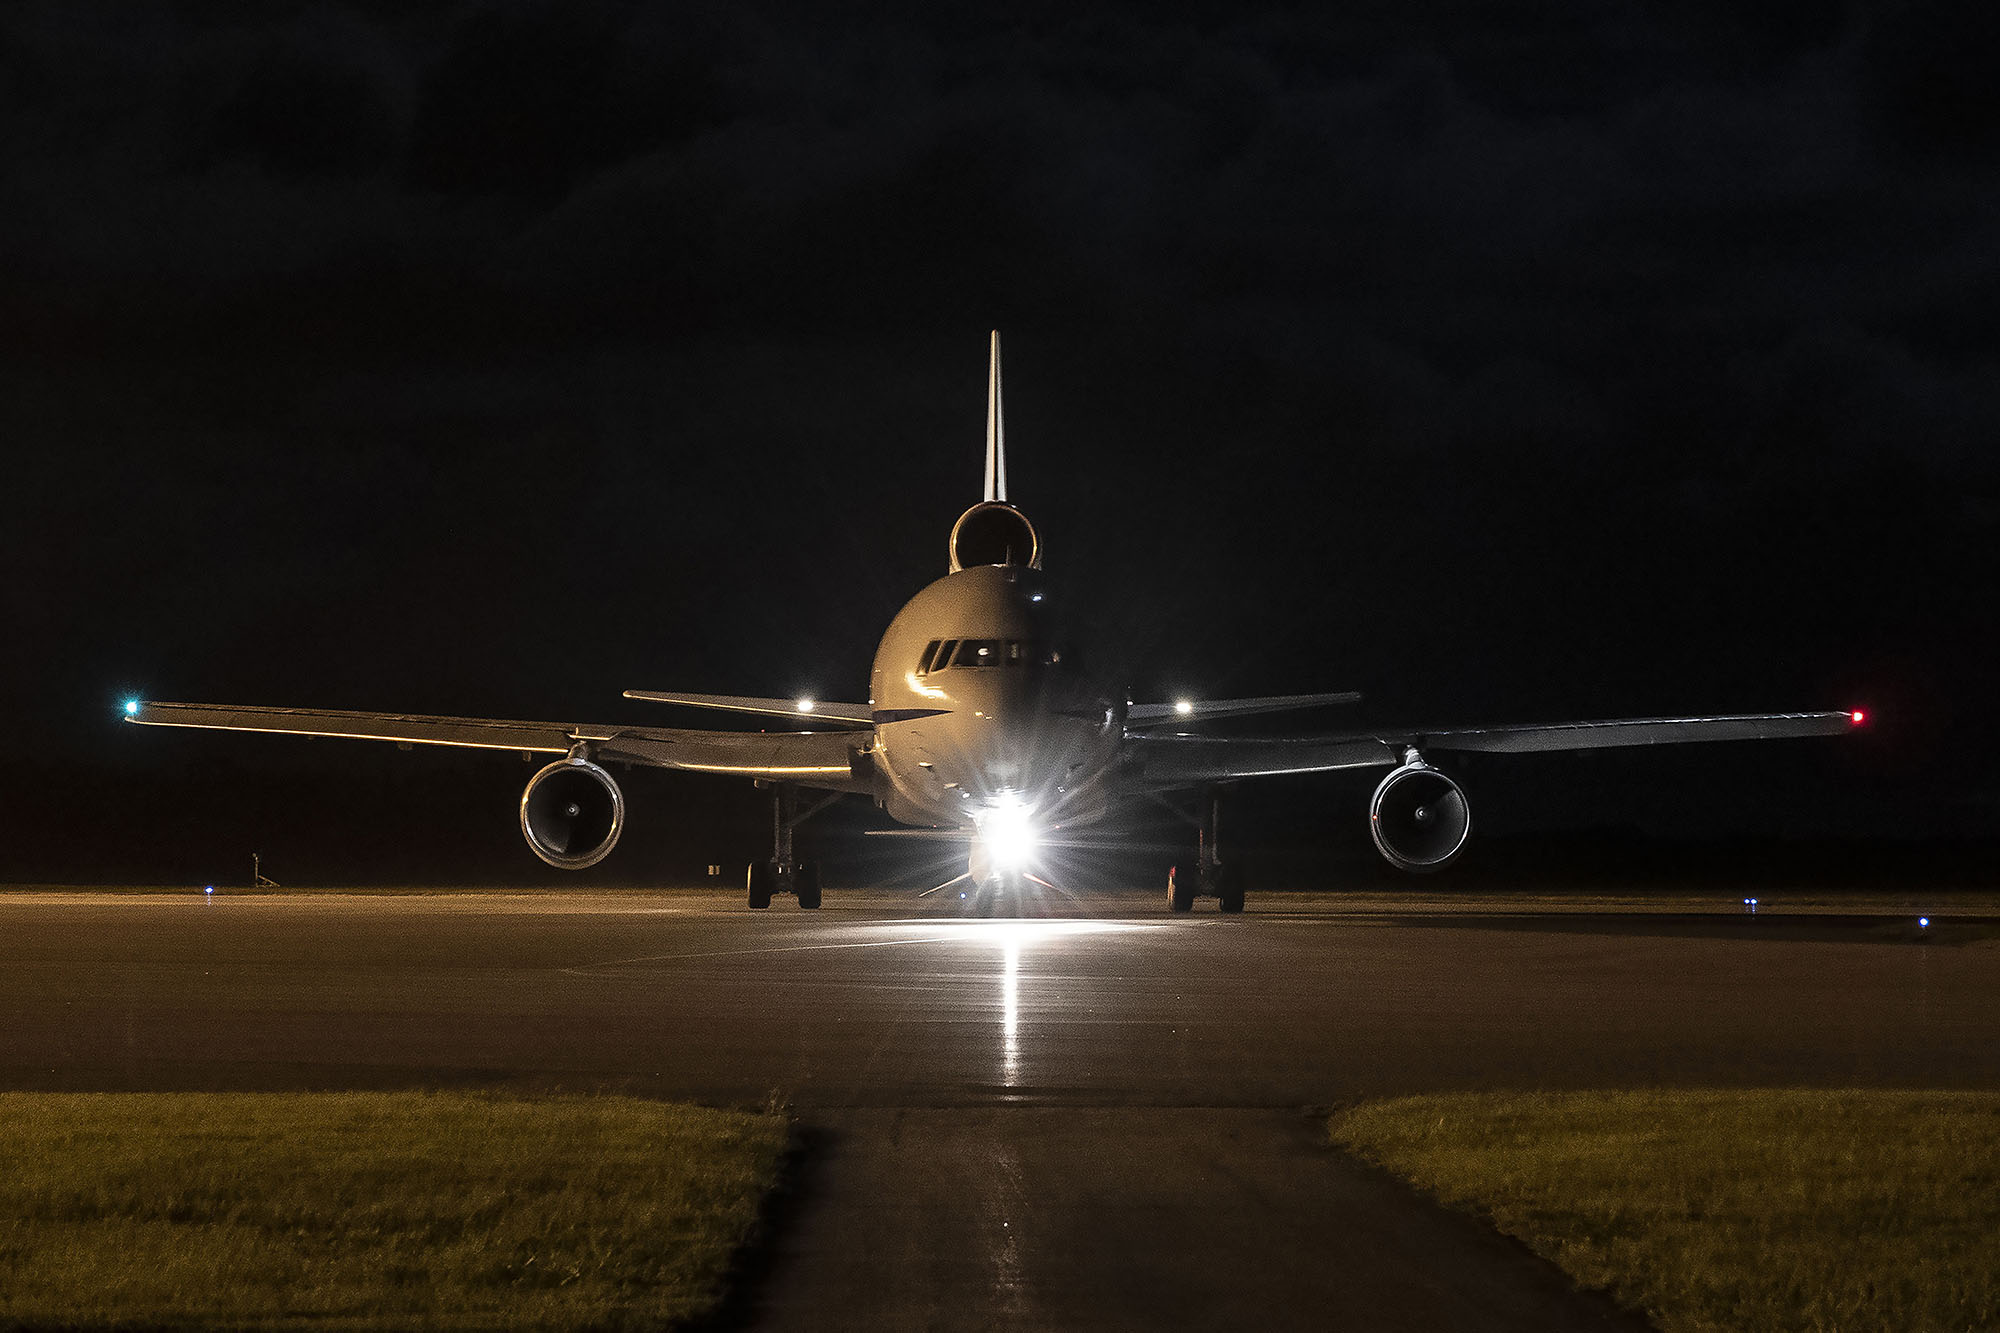 Front view of airplane with bright headlight on runway in front of night sky readying for takeoff